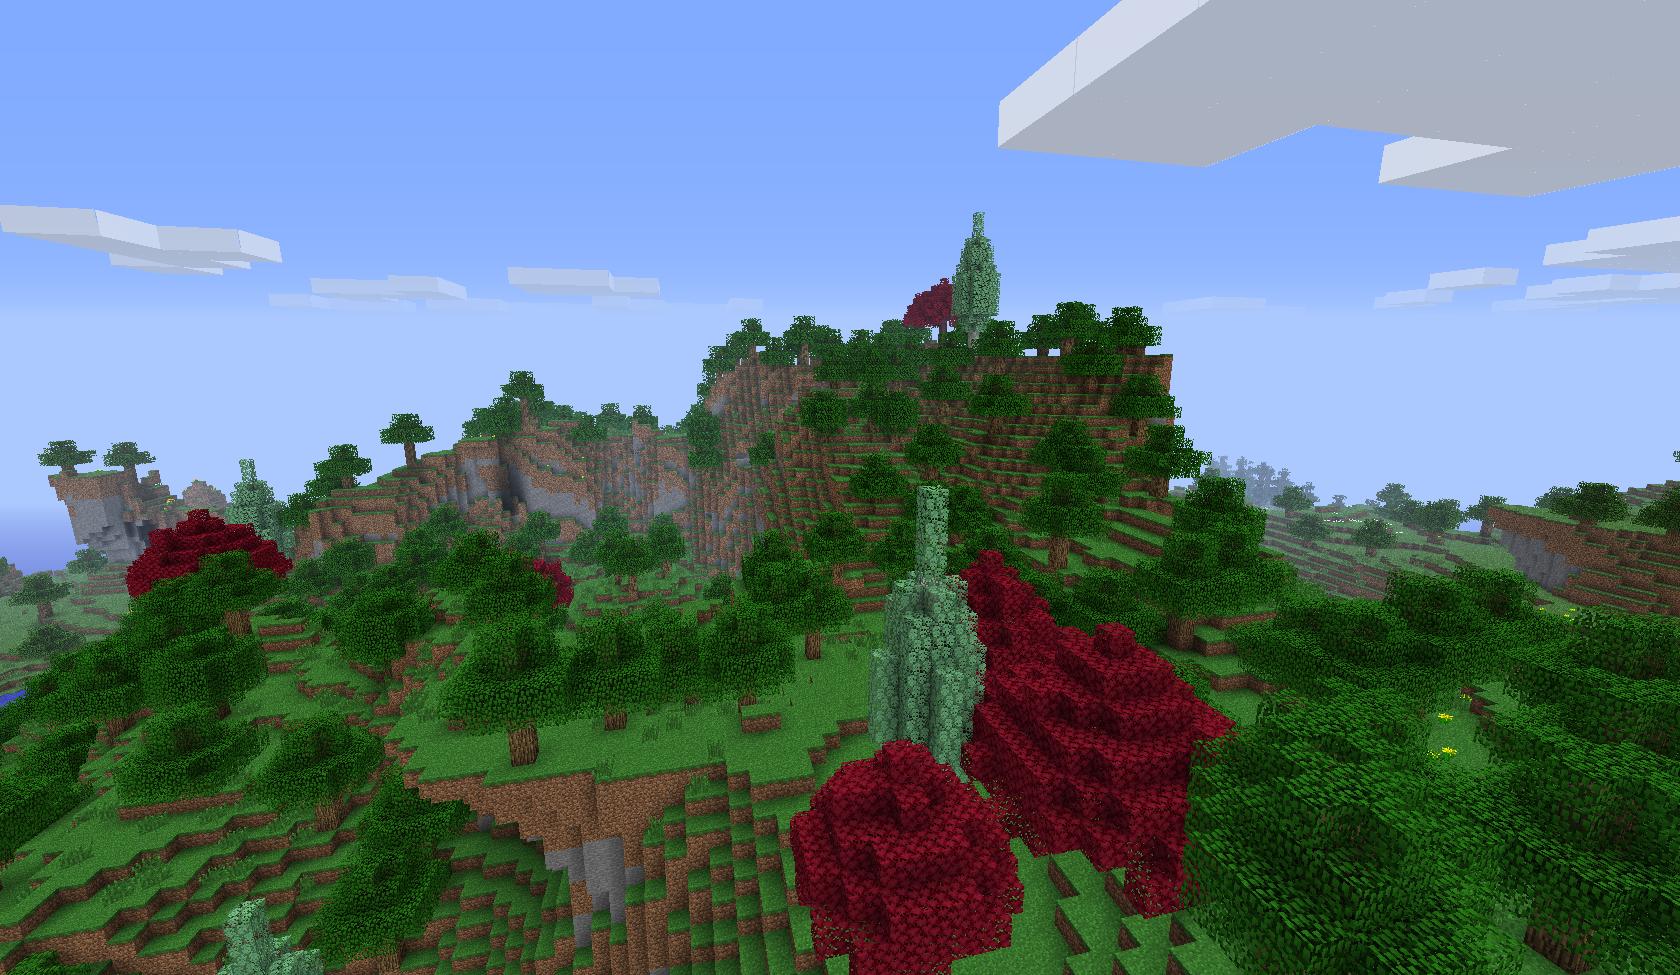 Forested hills biome